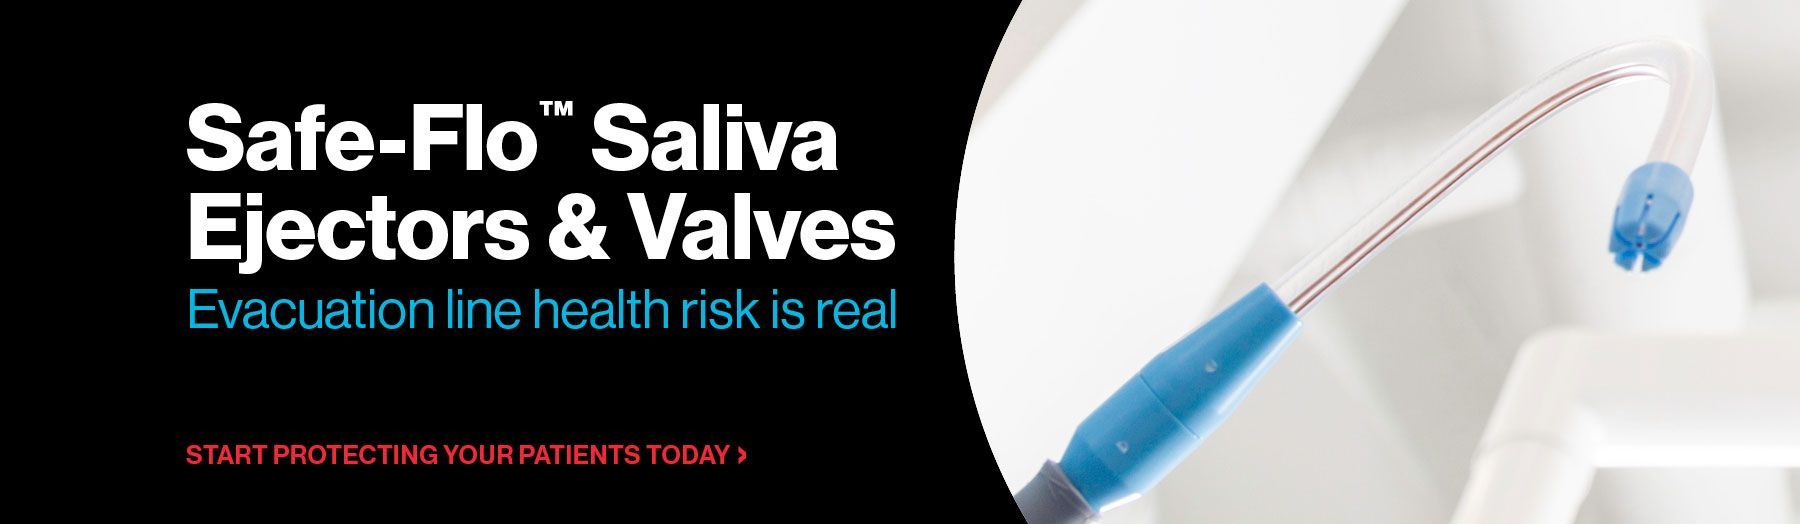 Safe-Flo Saliva Ejectors and Valves, Evacuation line health risk is real, start protecting your patients today